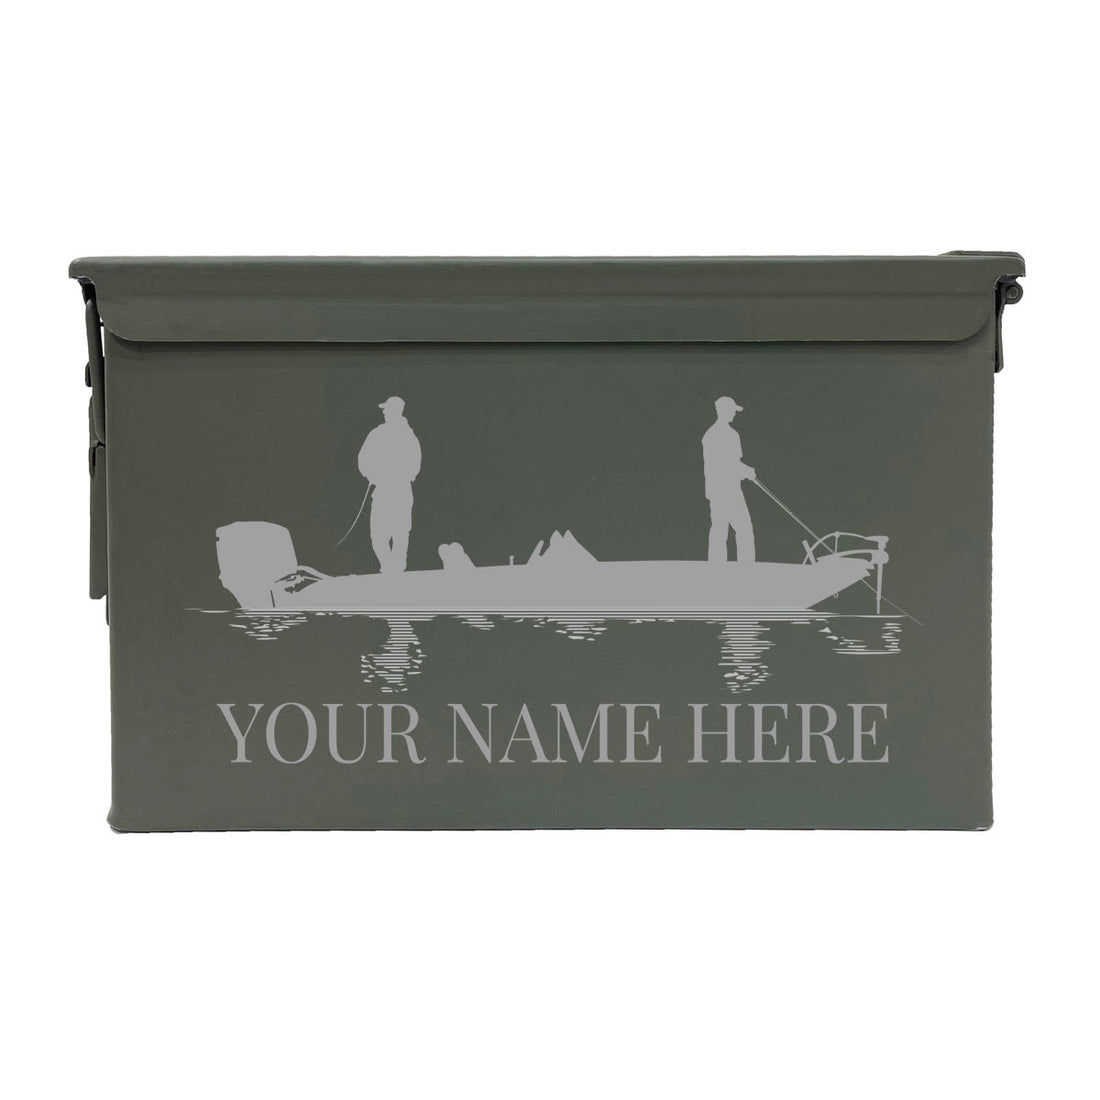 Laser Engraved - BASS BOAT - Used Grade 1 Ammo Cans - 30 Cal, 50 Cal or Fat 50 - ATOM Promotions